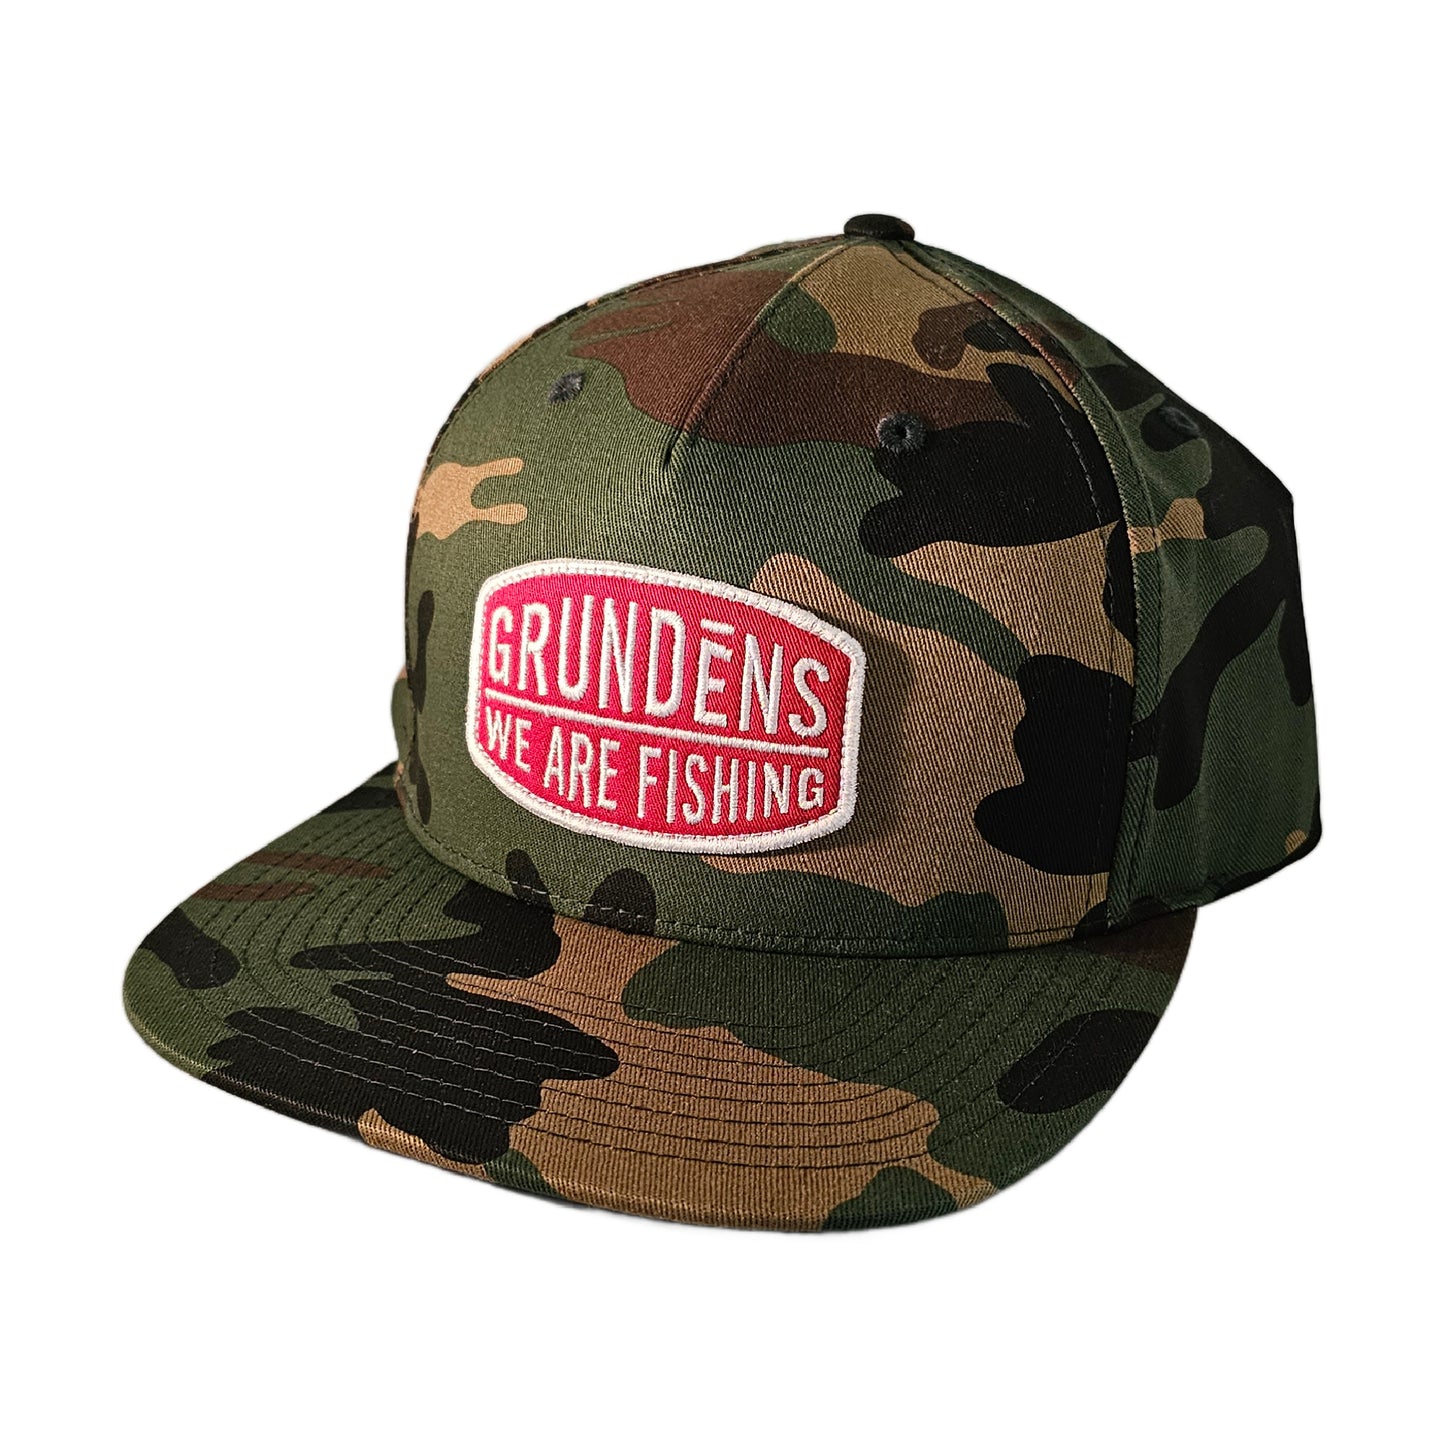 Grundens "We Are Fishing" Camo Hat